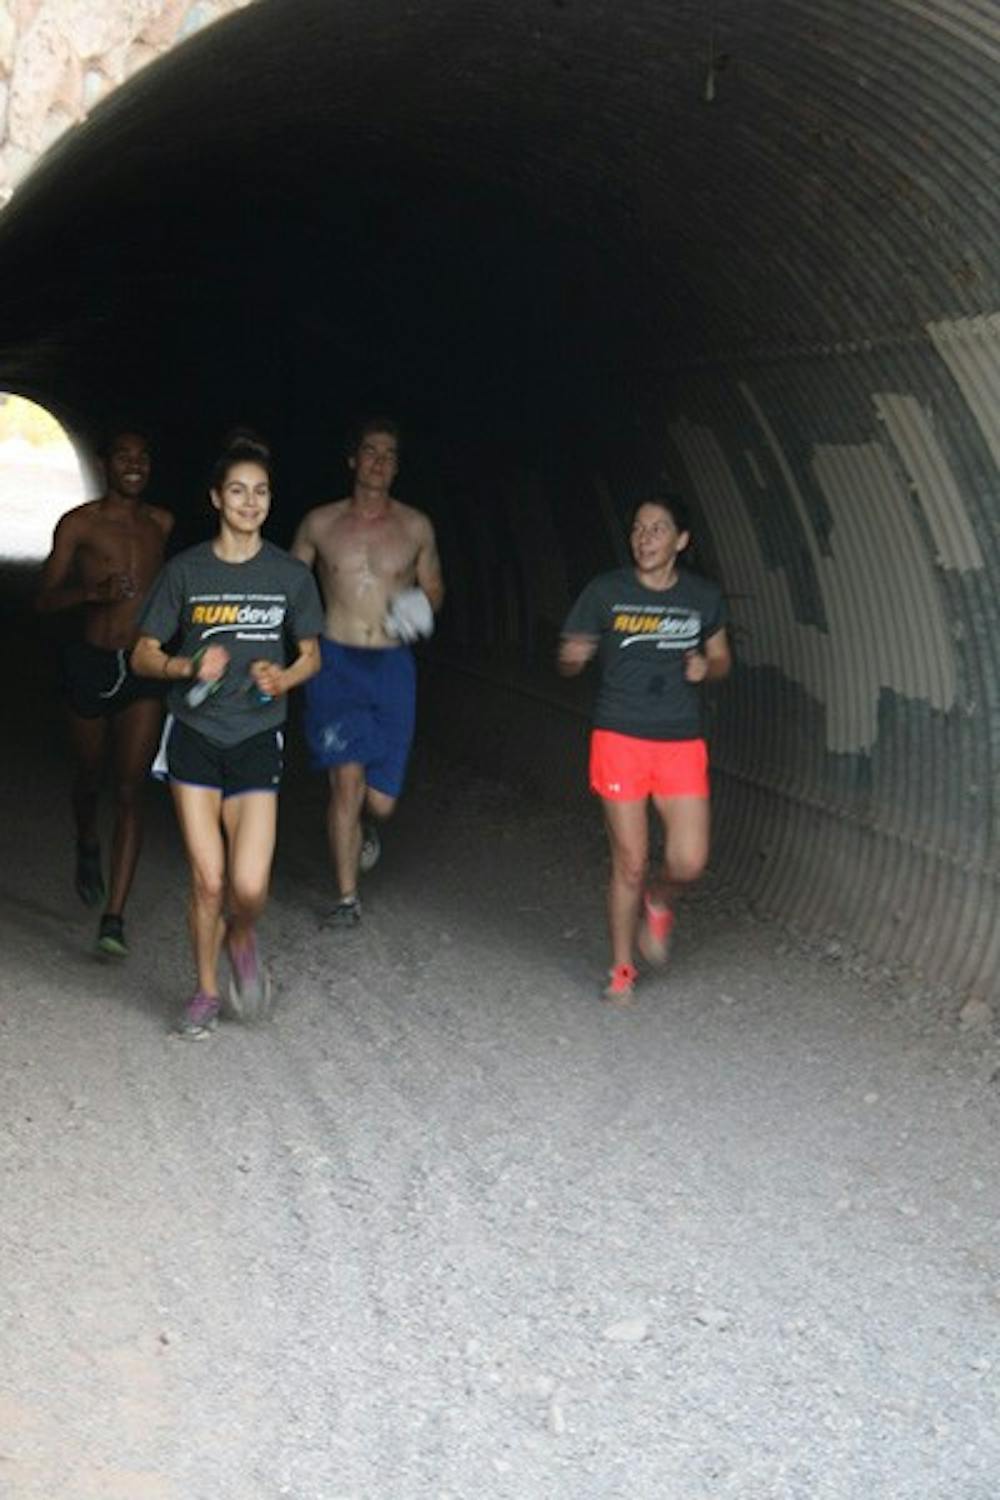 Four members of the ASU Running Club, (left to right) third-year law student Zara Torosyan, computer science sophomore Jack Workman, communications sophomore Emily Glynn, and philosophy senior and club president Daniel Suber emerge out of a tunnel at a local park in Tempe Wednesday morning after running nearly four miles. (Photo by Jessie Wardarski)